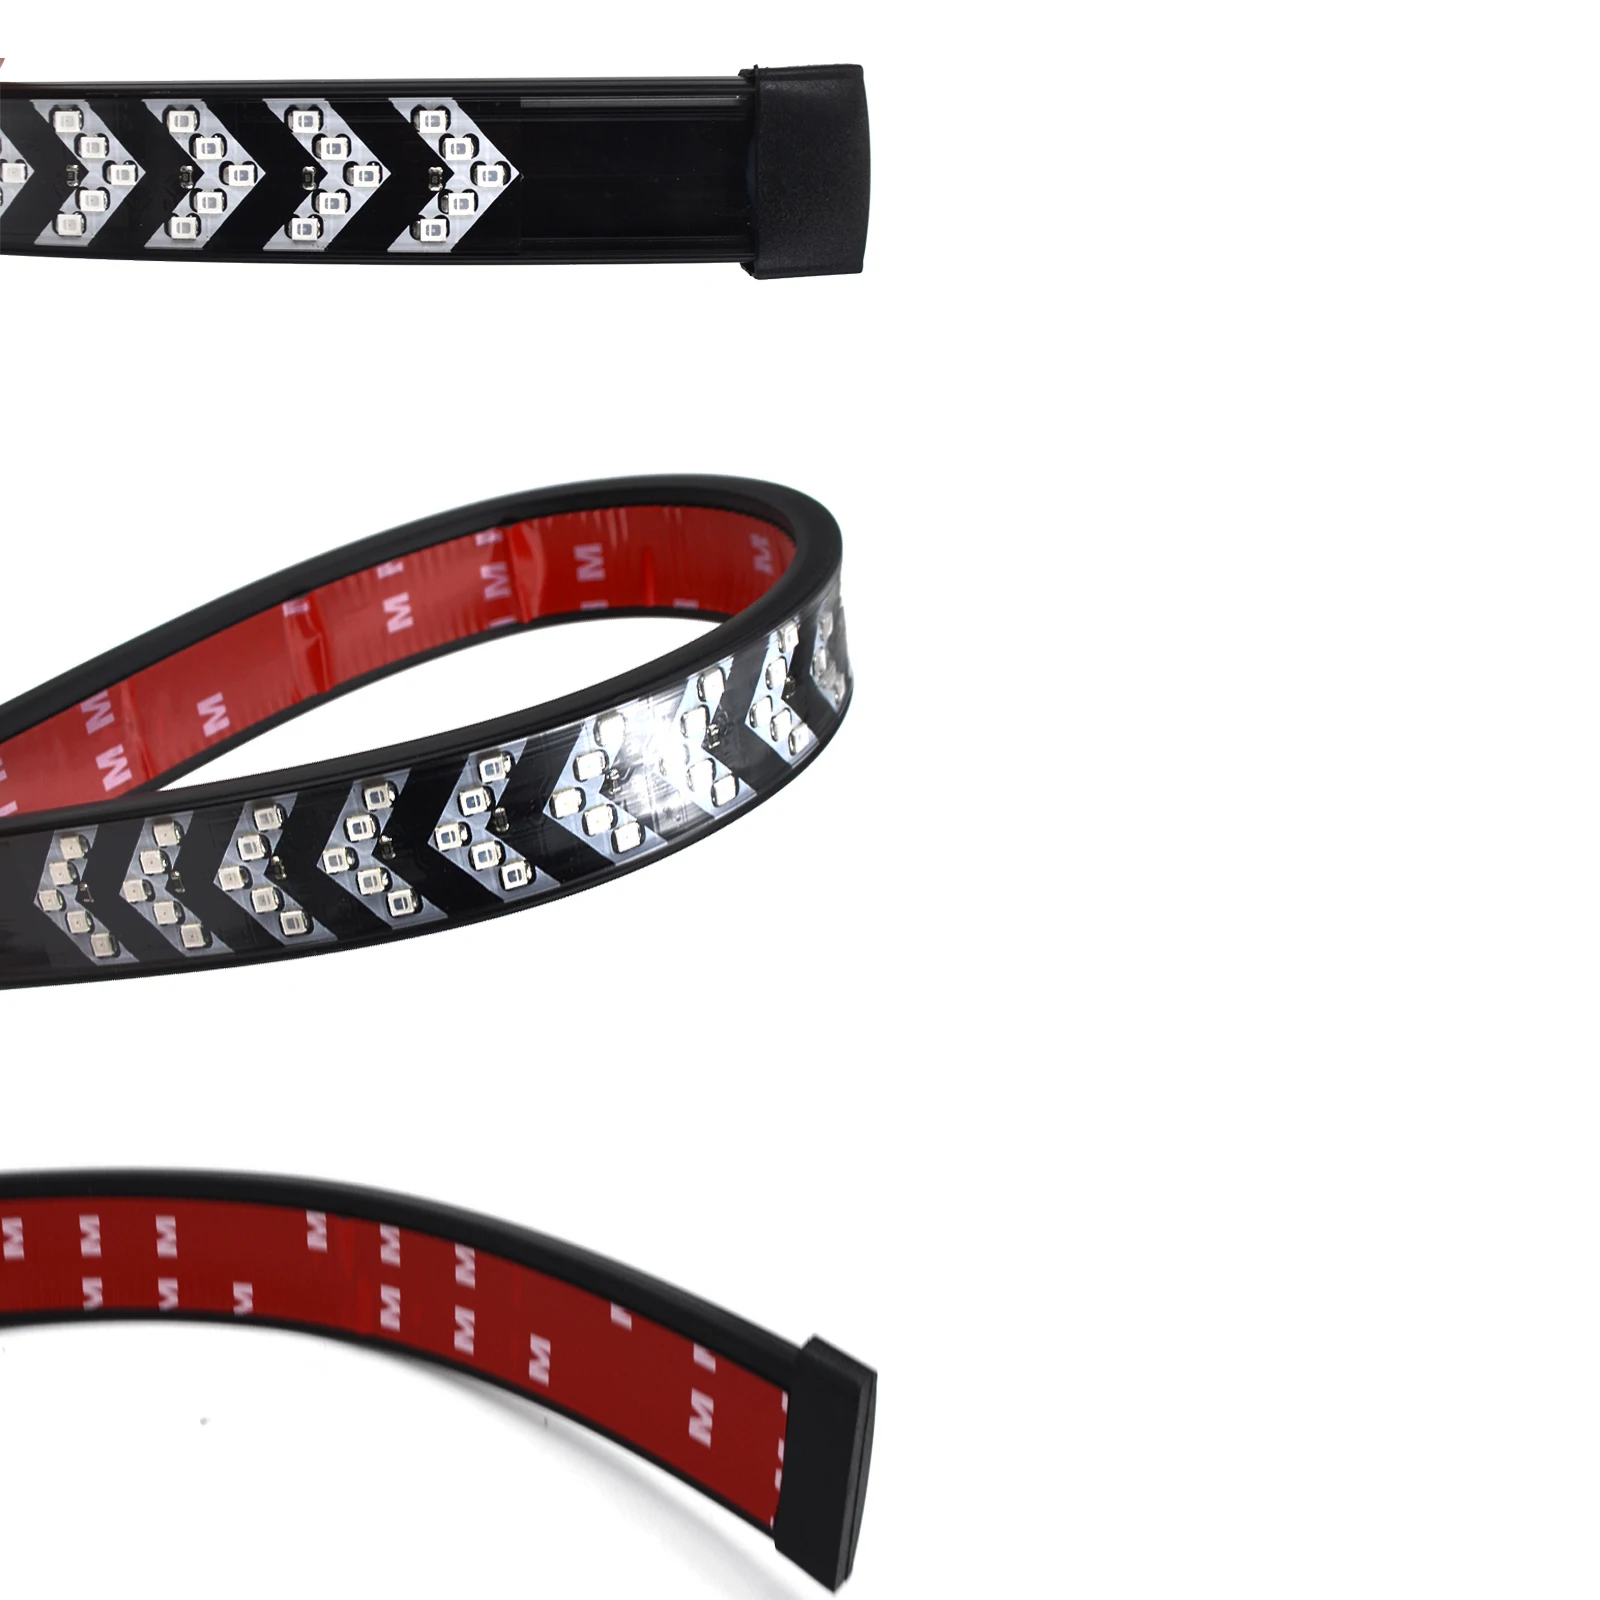 Factory direct sale high durability led car offroad driving turn life tail light bar for truck